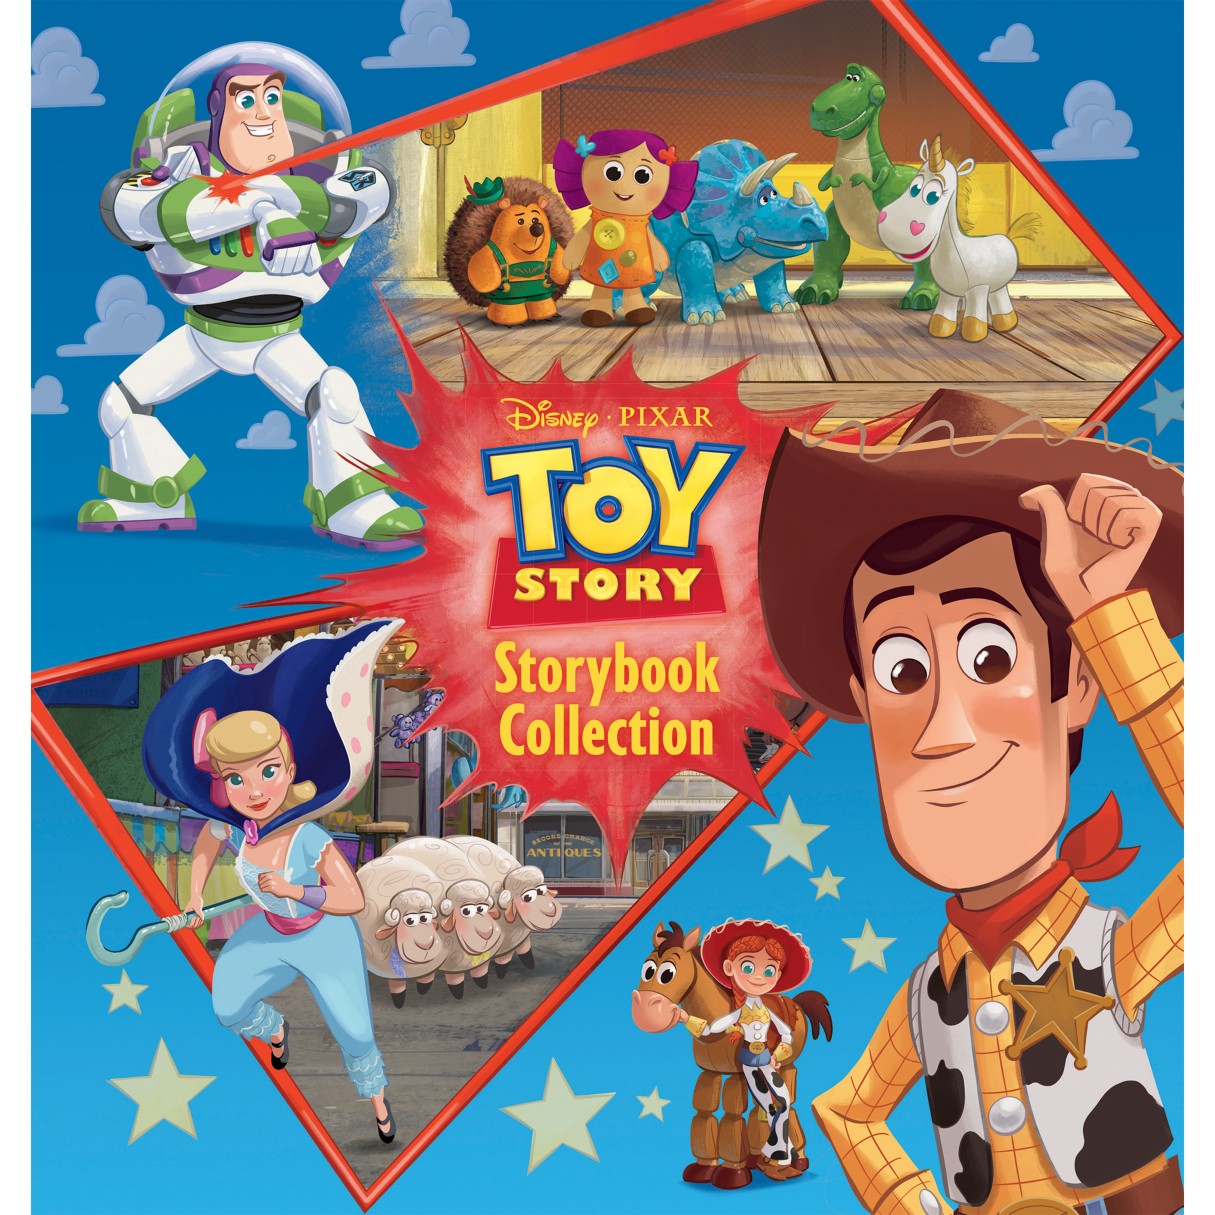 Toy Story: Storybook Collection